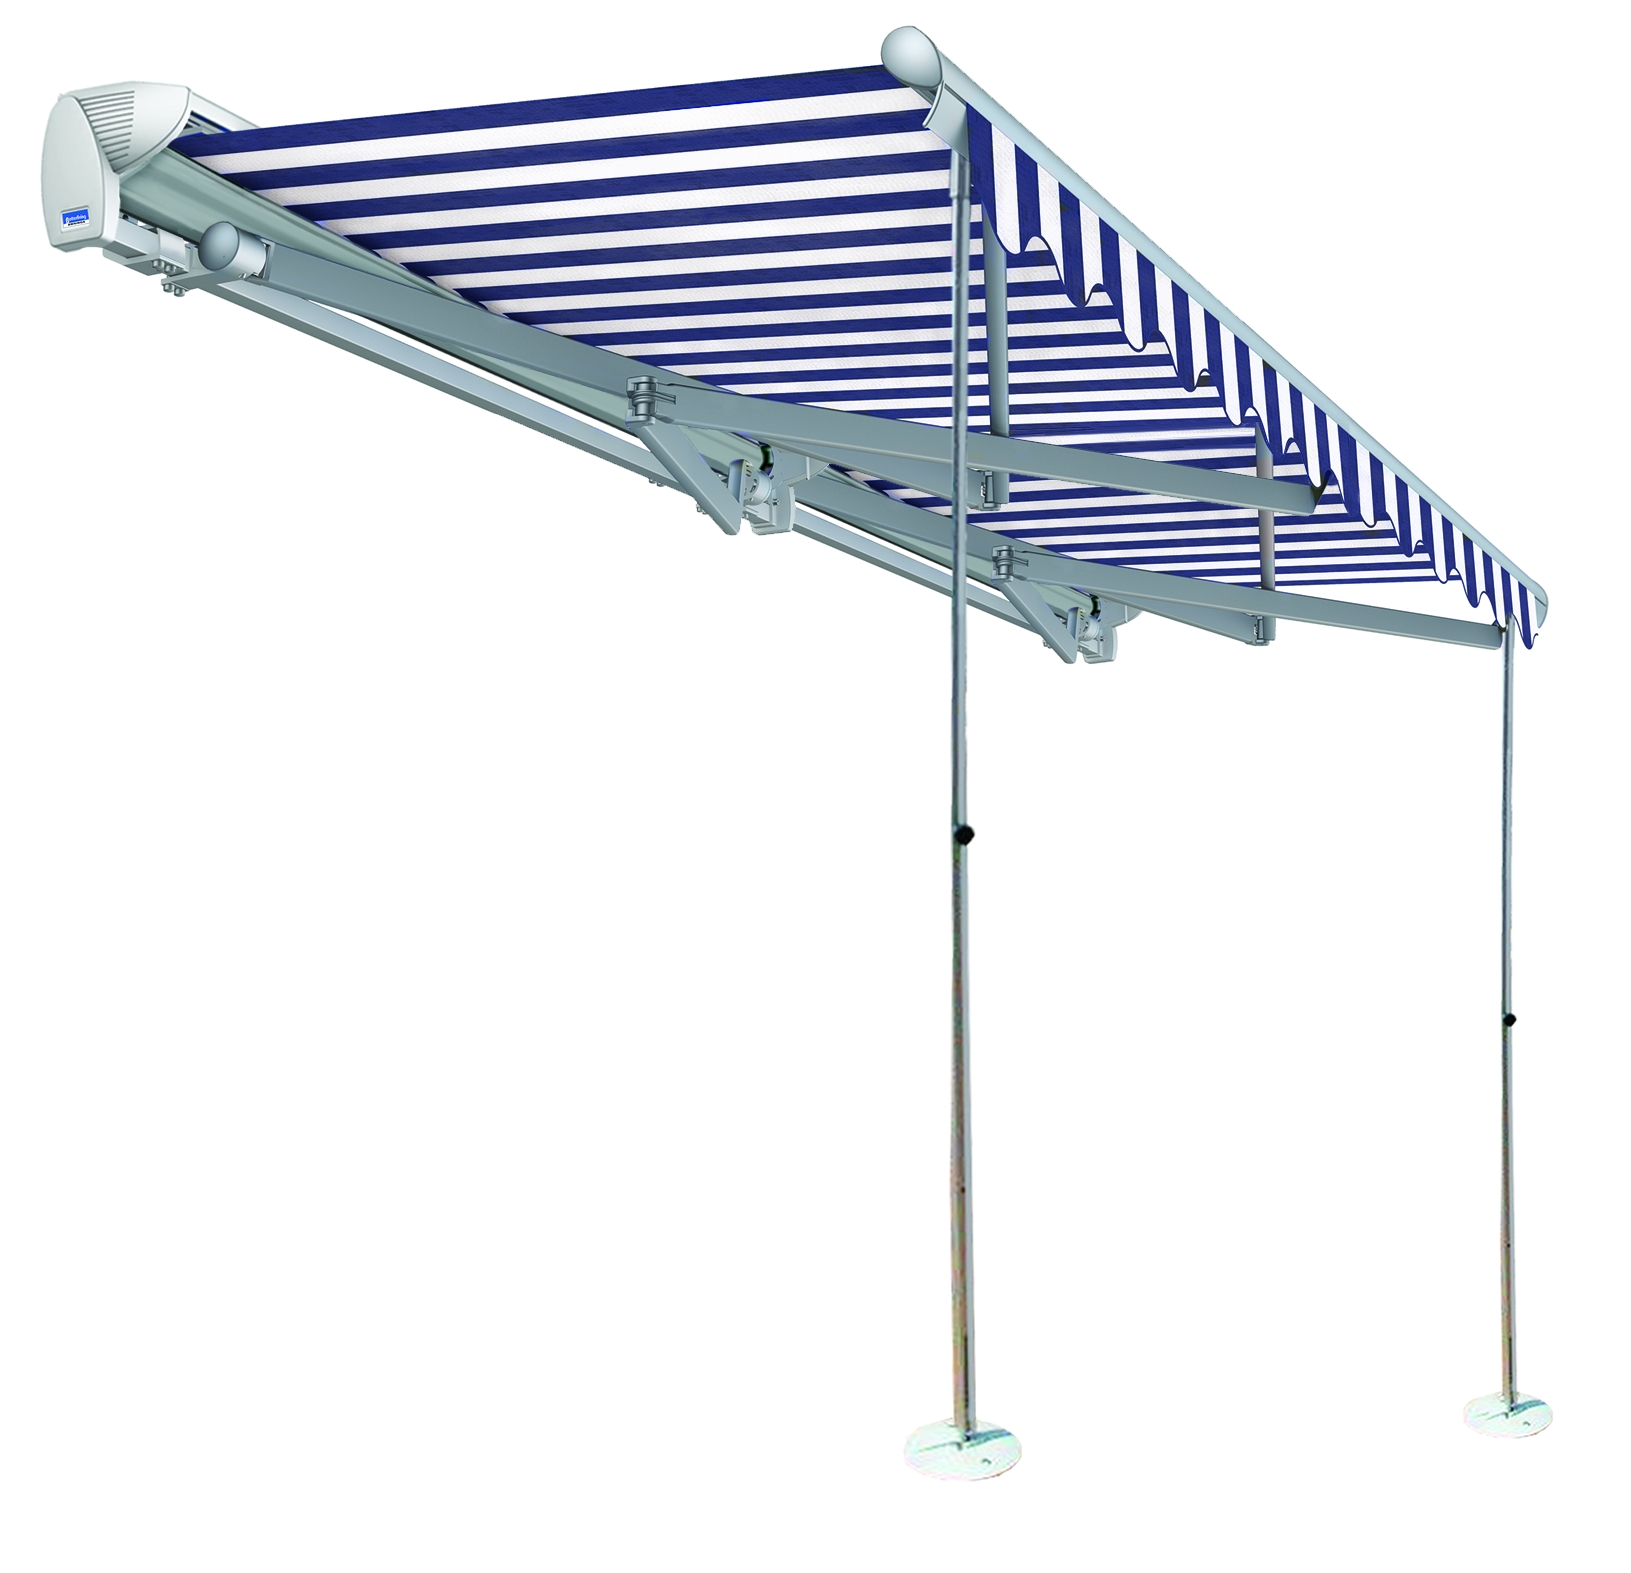 Retractable Awnings Model3 Retractable Awning Store